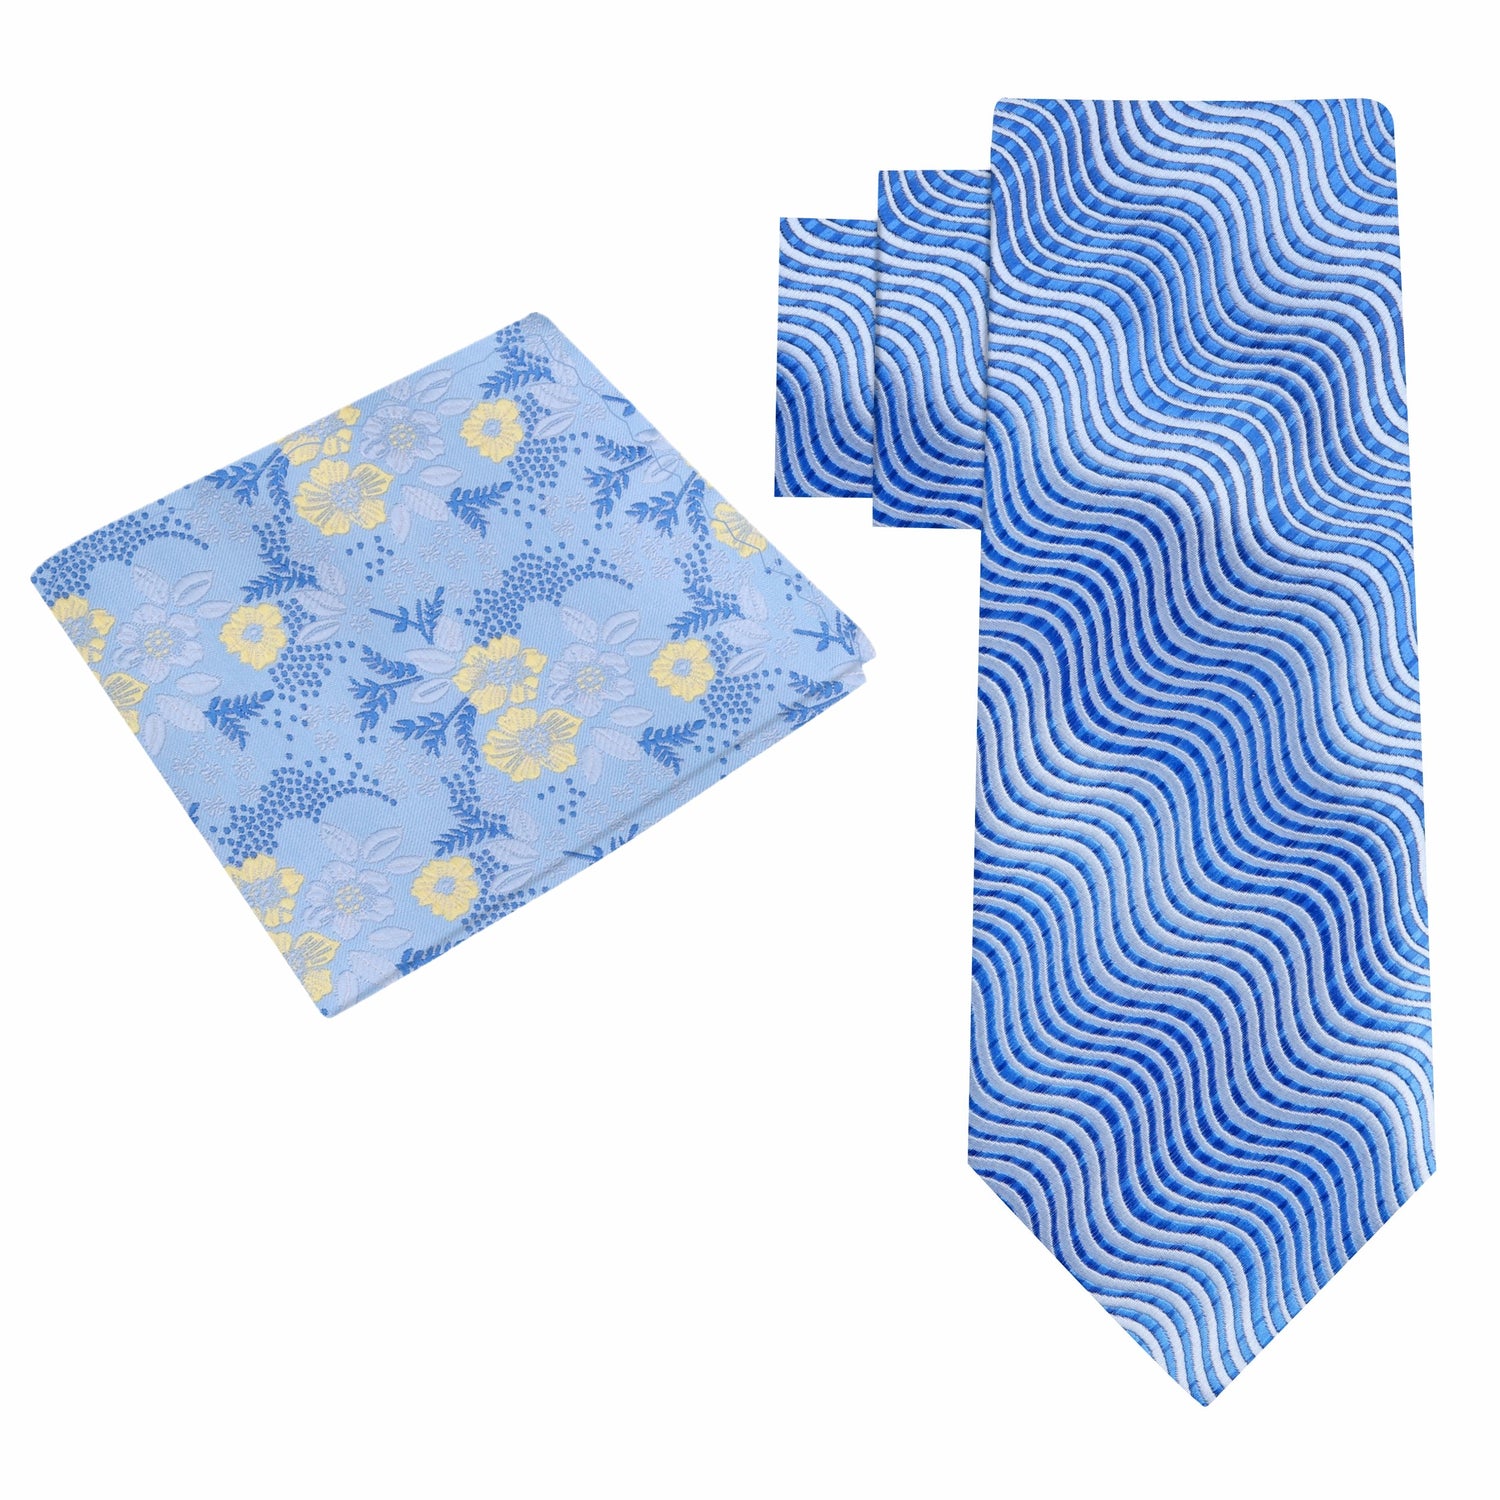 Alt View: Shades of Blue Wavy Lines Necktie with Shades of Blue and Yellow Floral Pocket Square